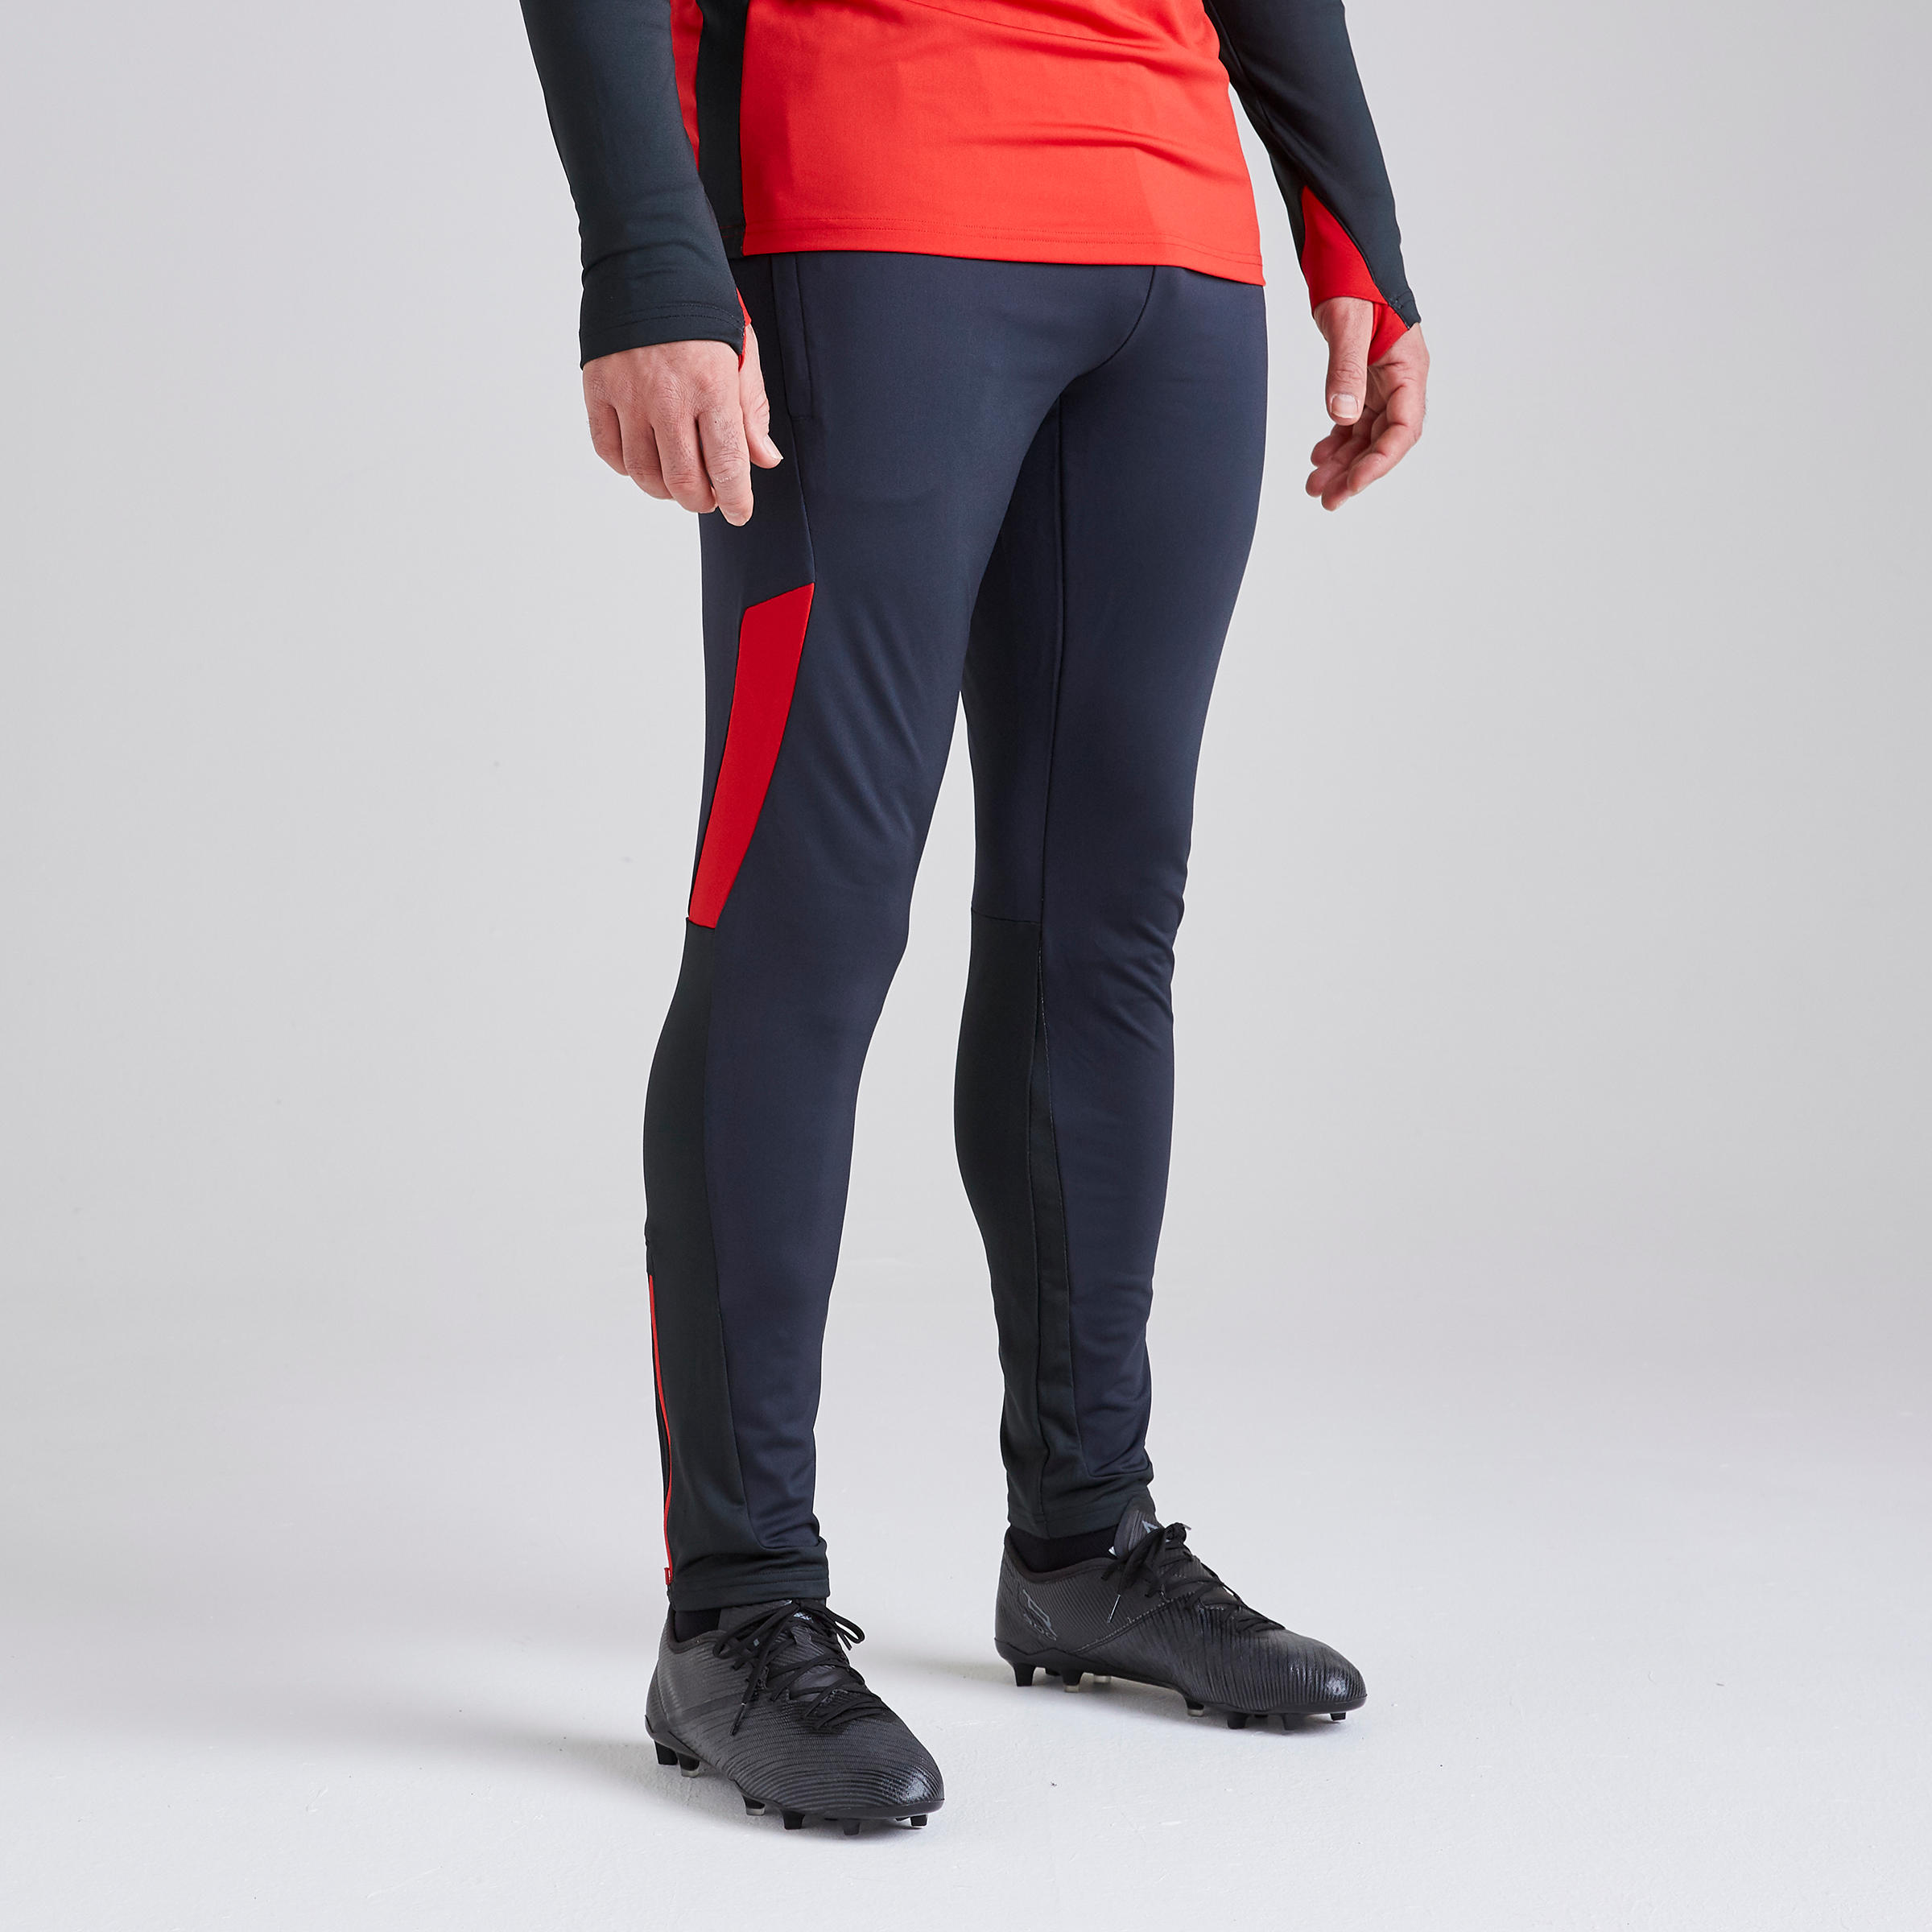 Adult Football Bottoms T500 - Carbon Grey/Red 7/7